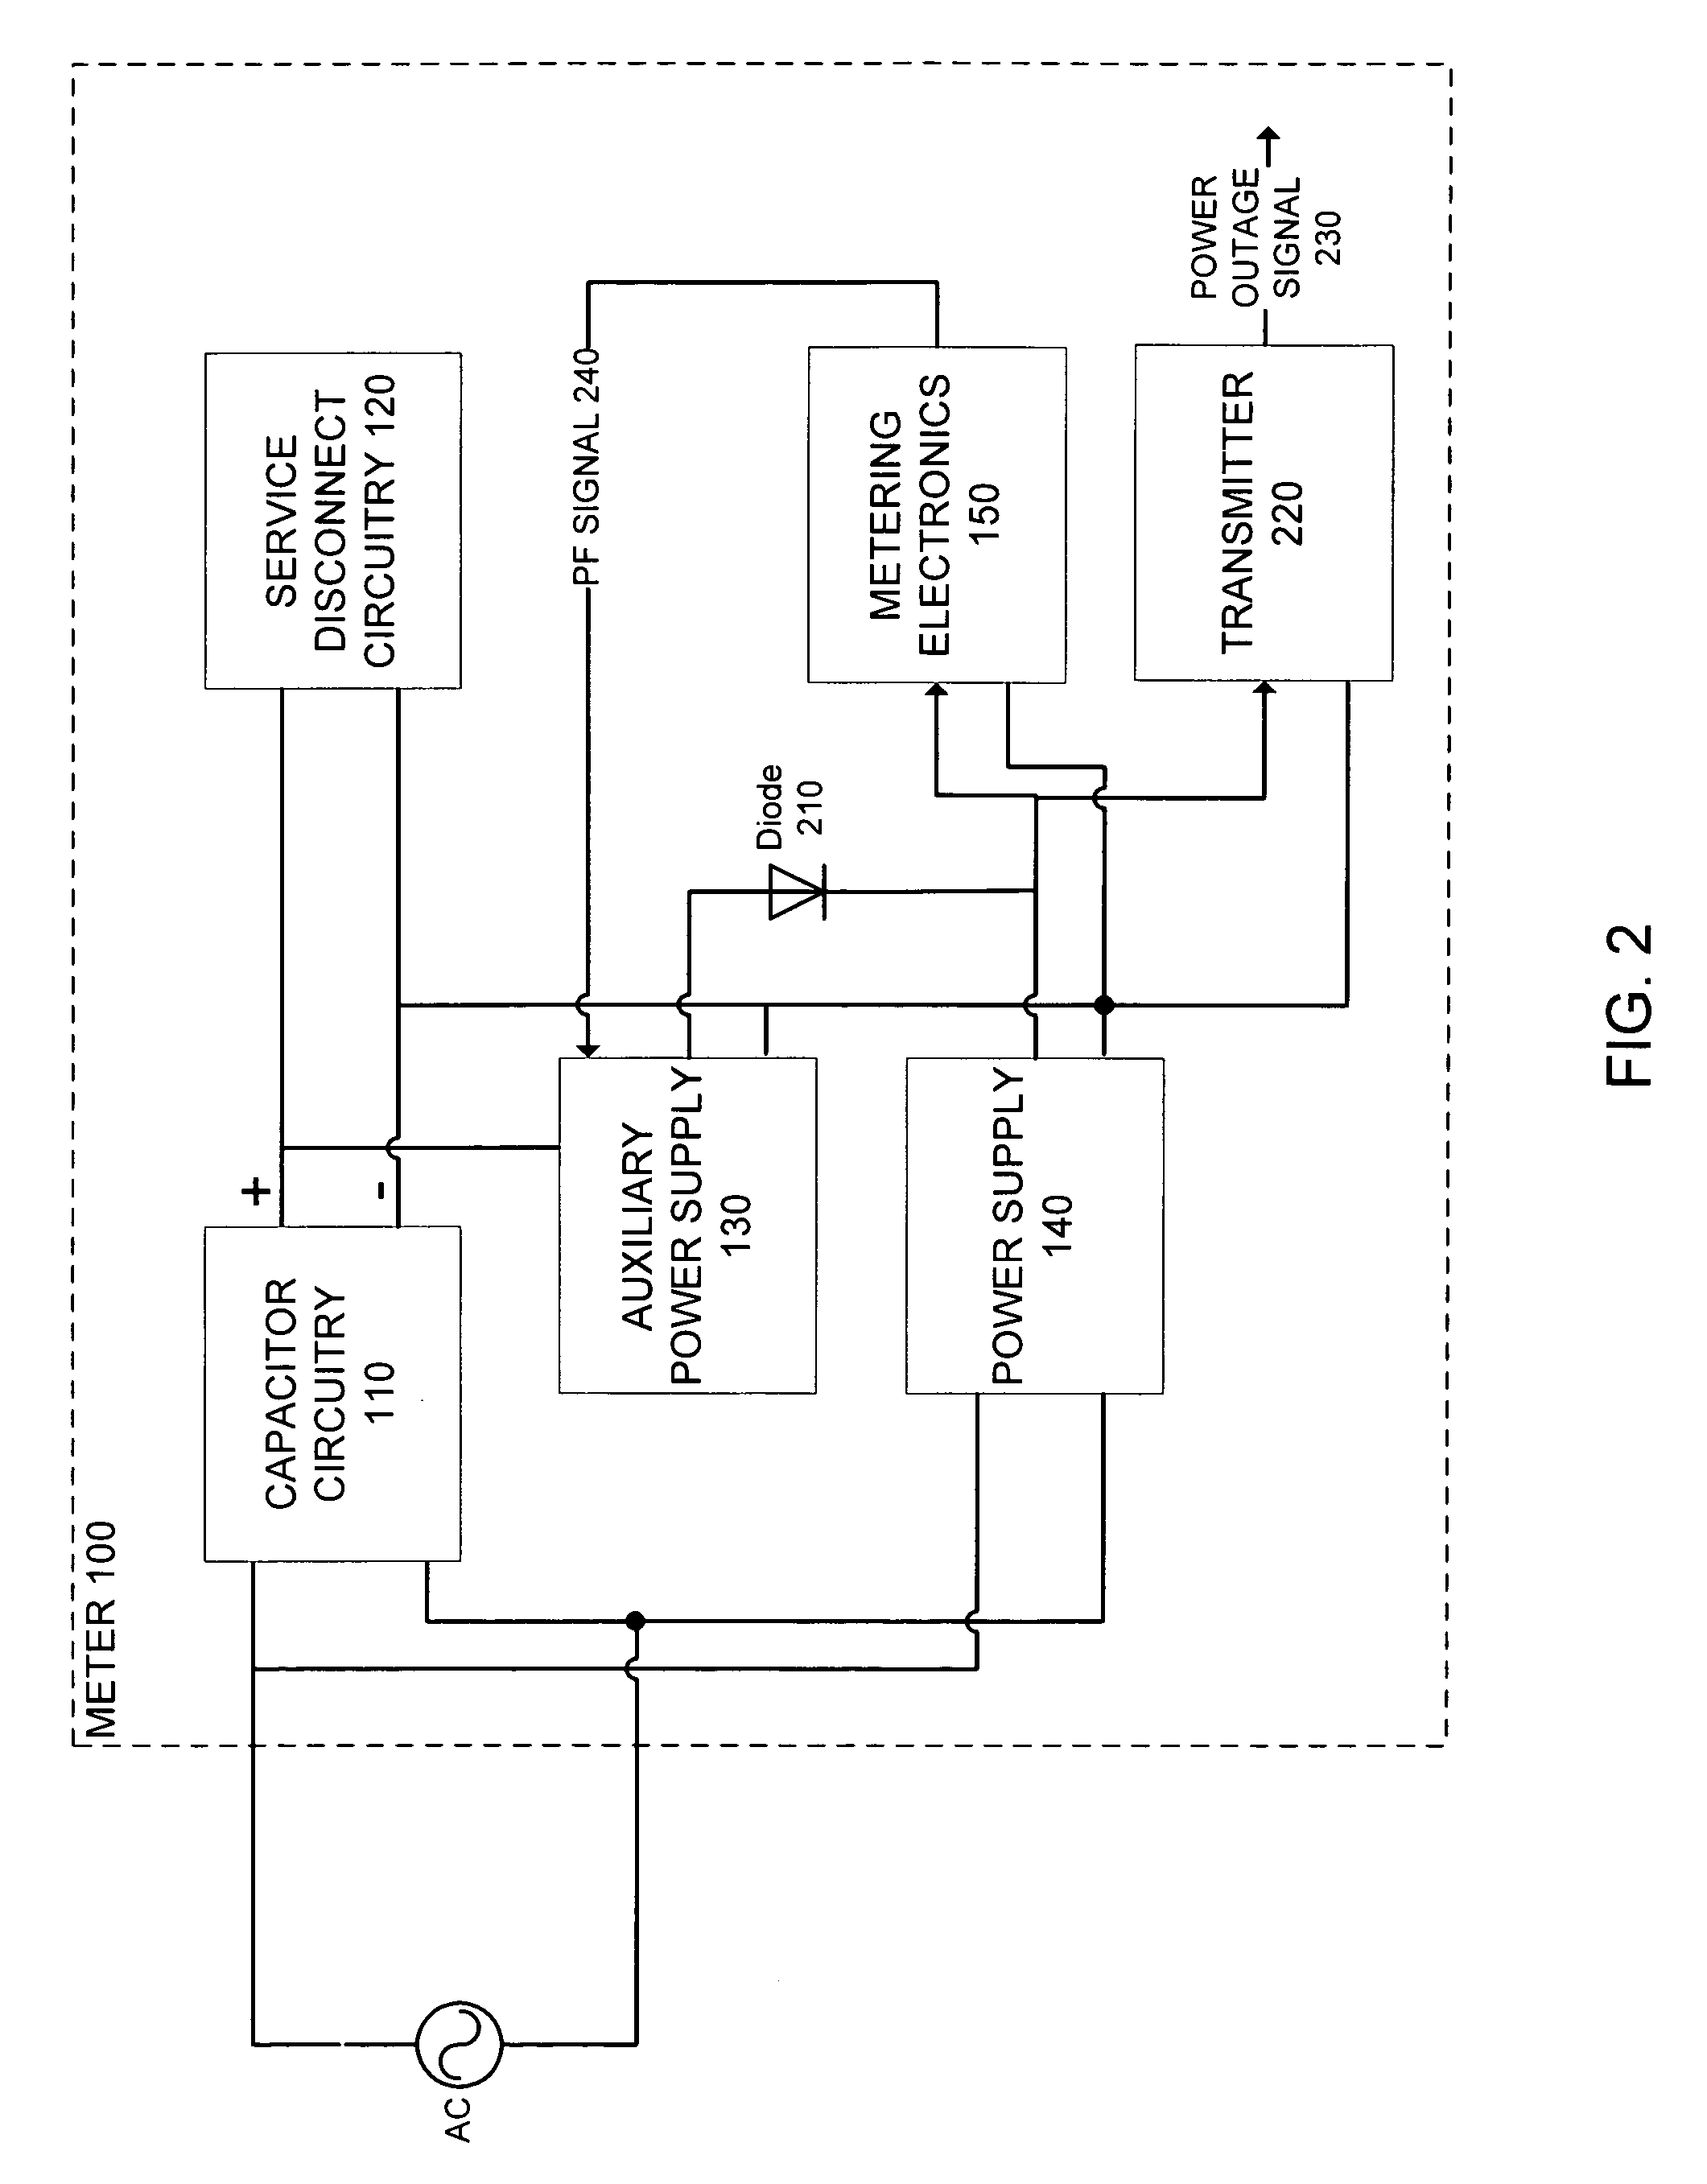 Auxiliary power supply for supplying power to additional functions within a meter